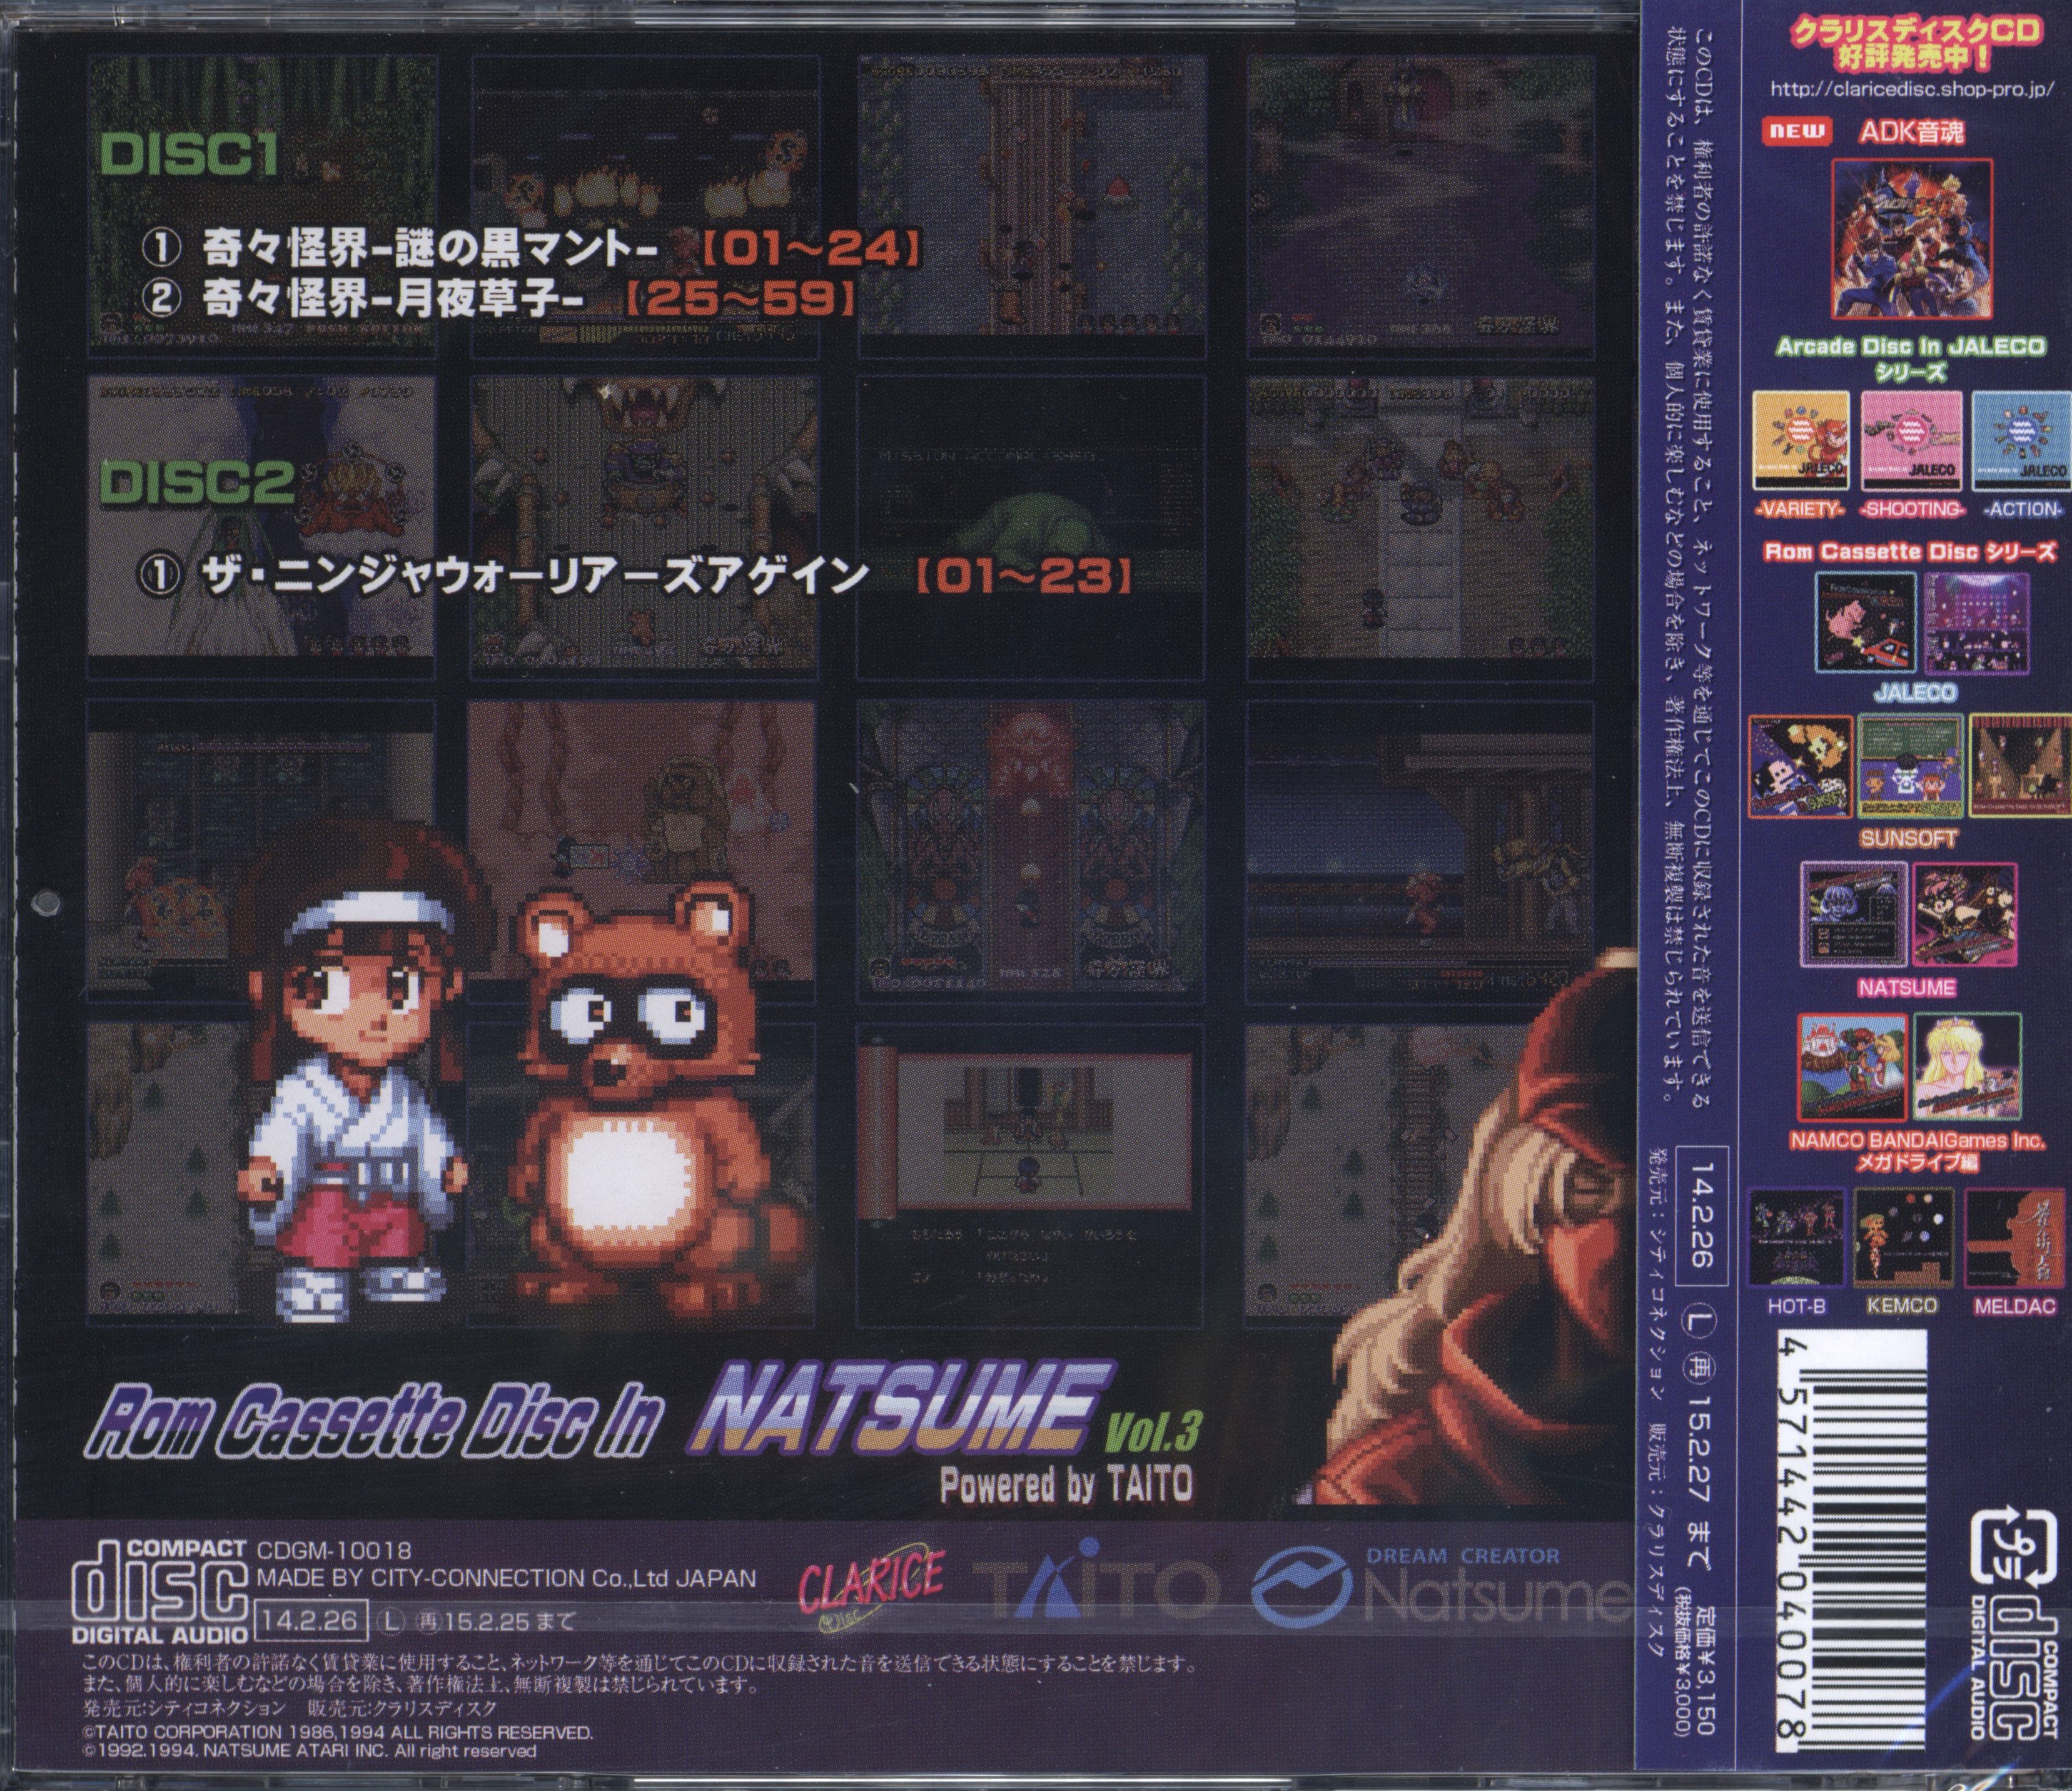 Rom Cassette Disc In NATSUME Vol.3 Powered by TAITO (2014) MP3